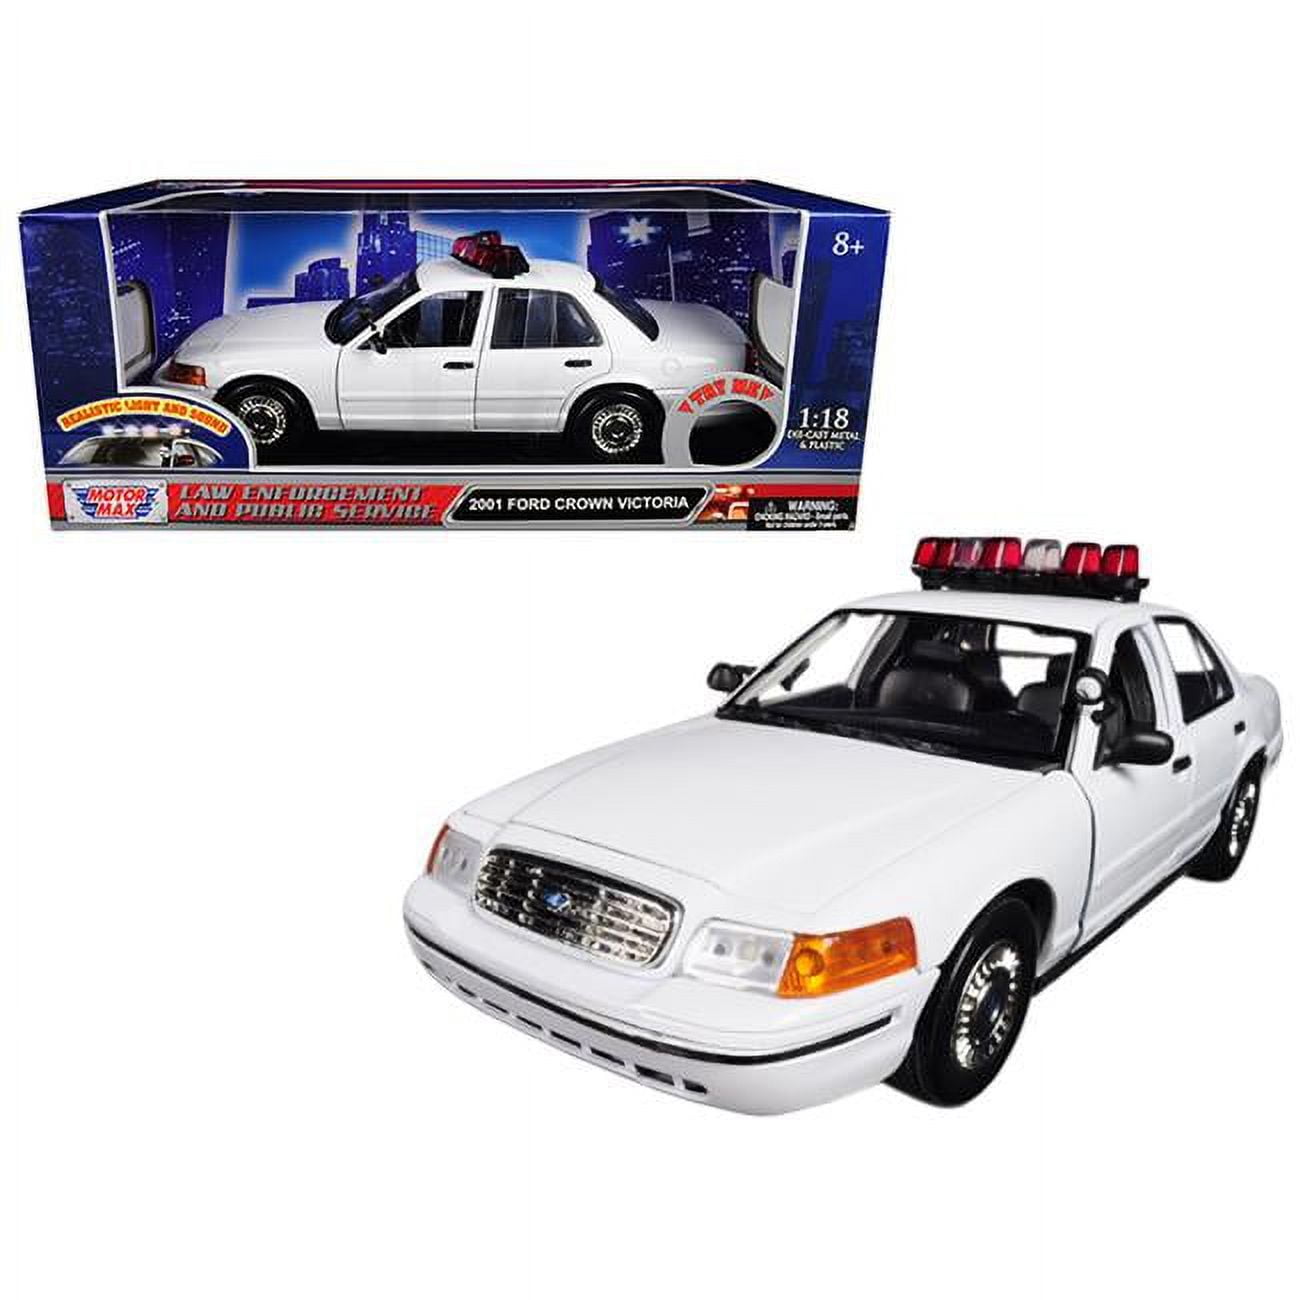 73992 1-18 2001 Ford Crown Victoria Police Diecast Model Car With Front & Rear Lights & Sound, White